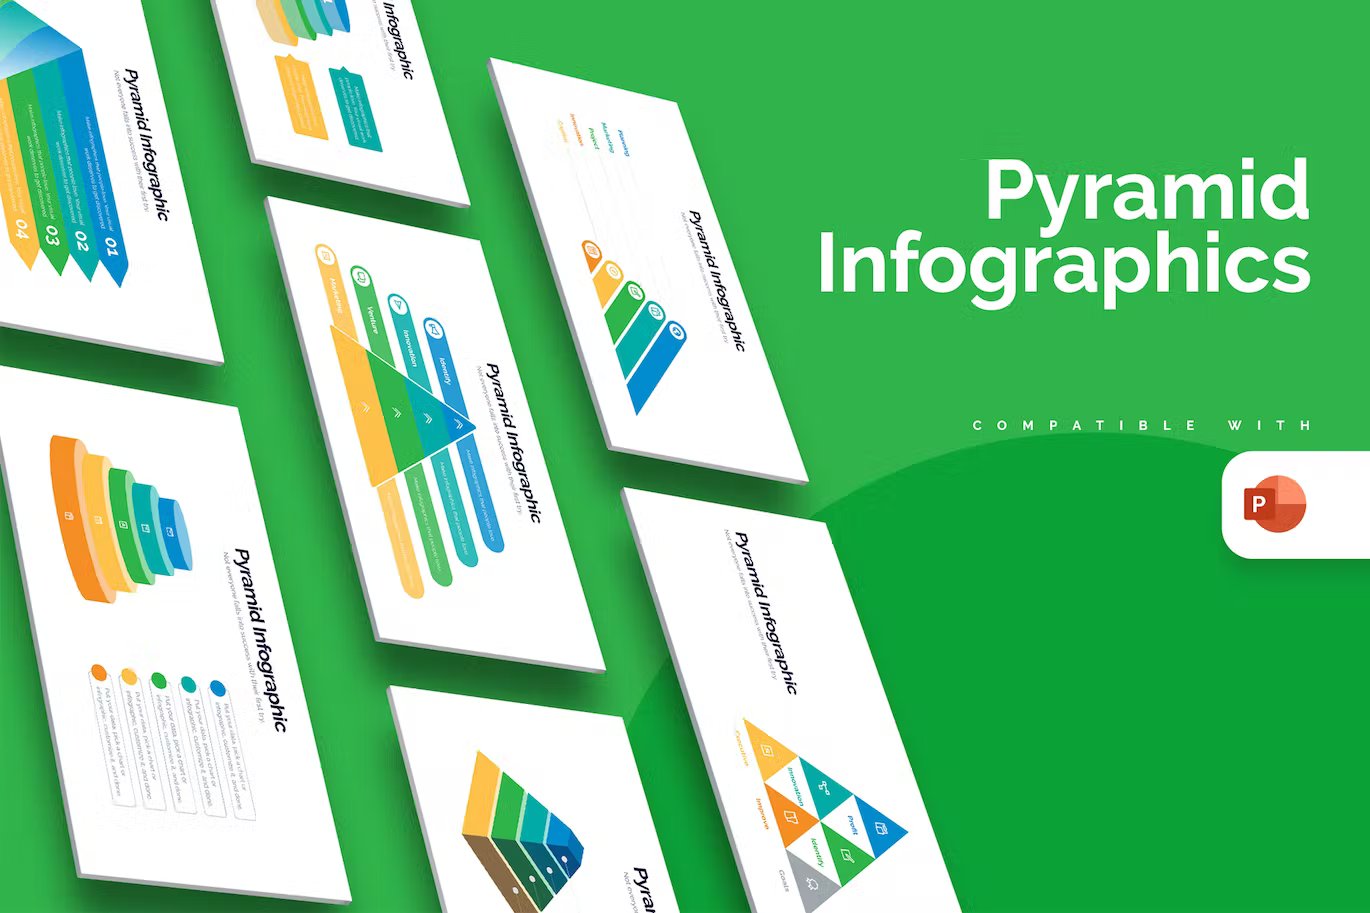 White lettering "Pyramid Infographics" and different presentation templates on a green background.